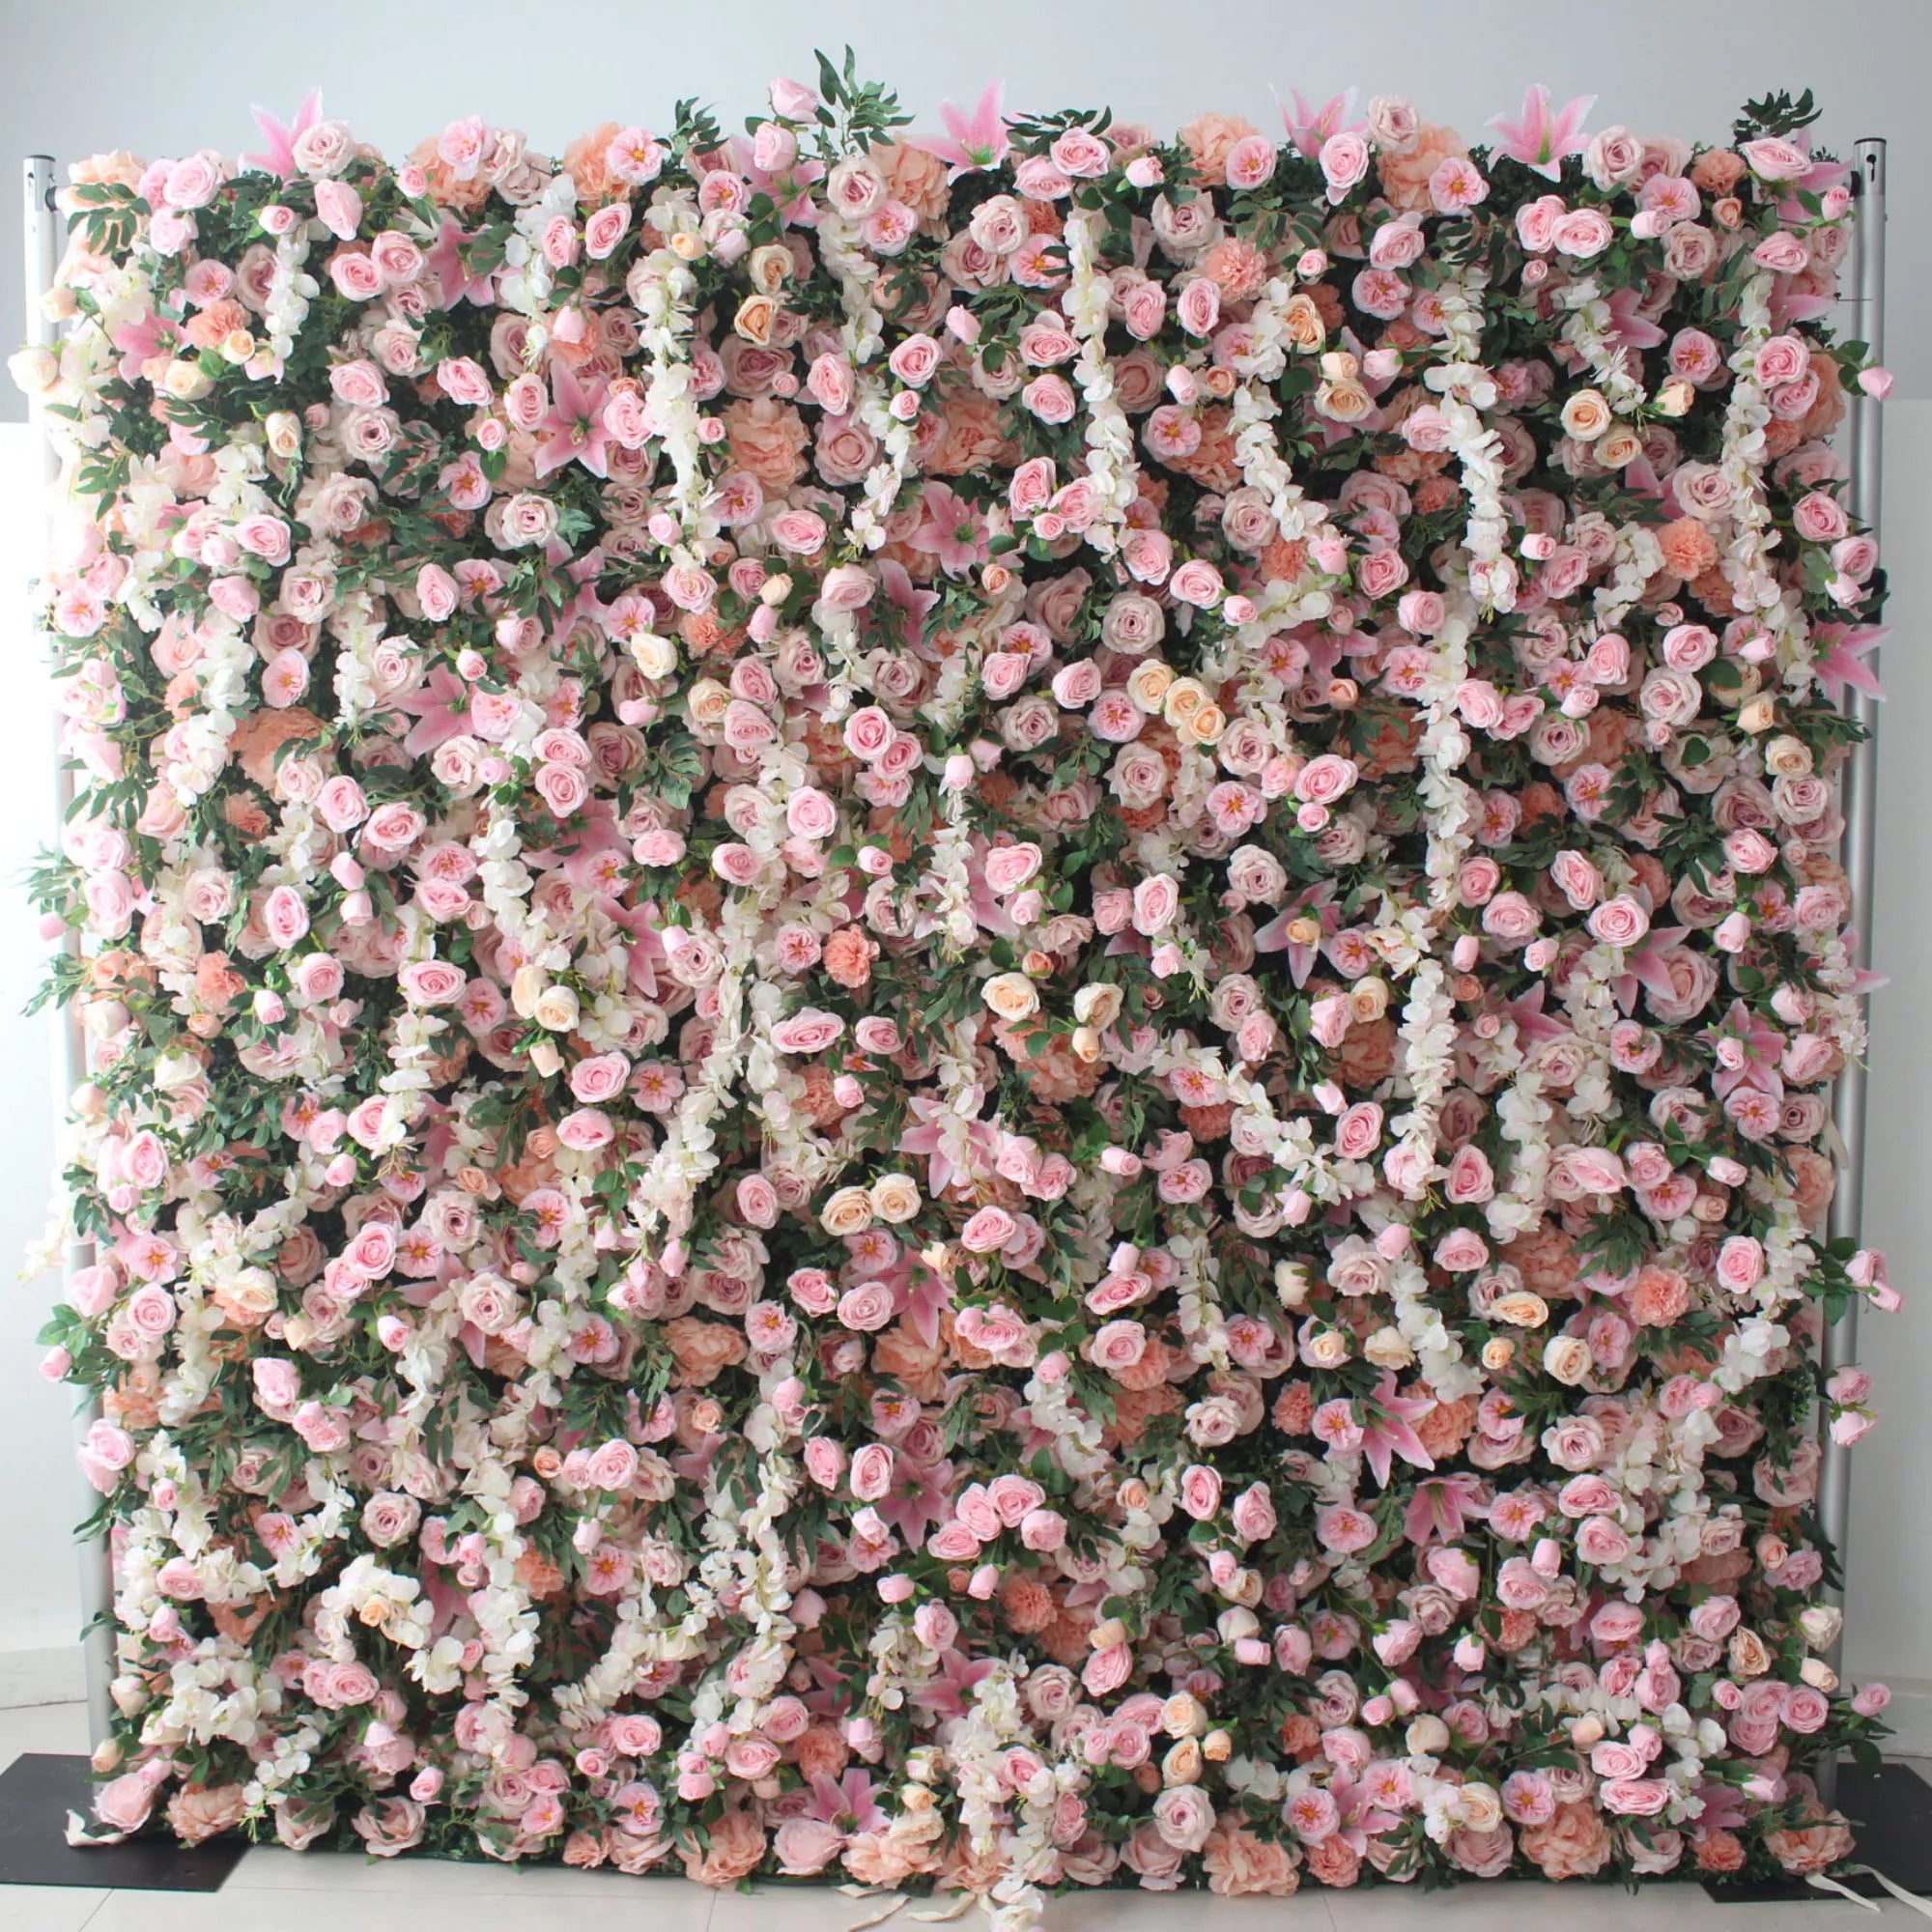 Valar Flowers Roll Up Fabric Artificial Flower Wall Wedding Backdrop, Floral Party Decor, Event Photography-VF-125